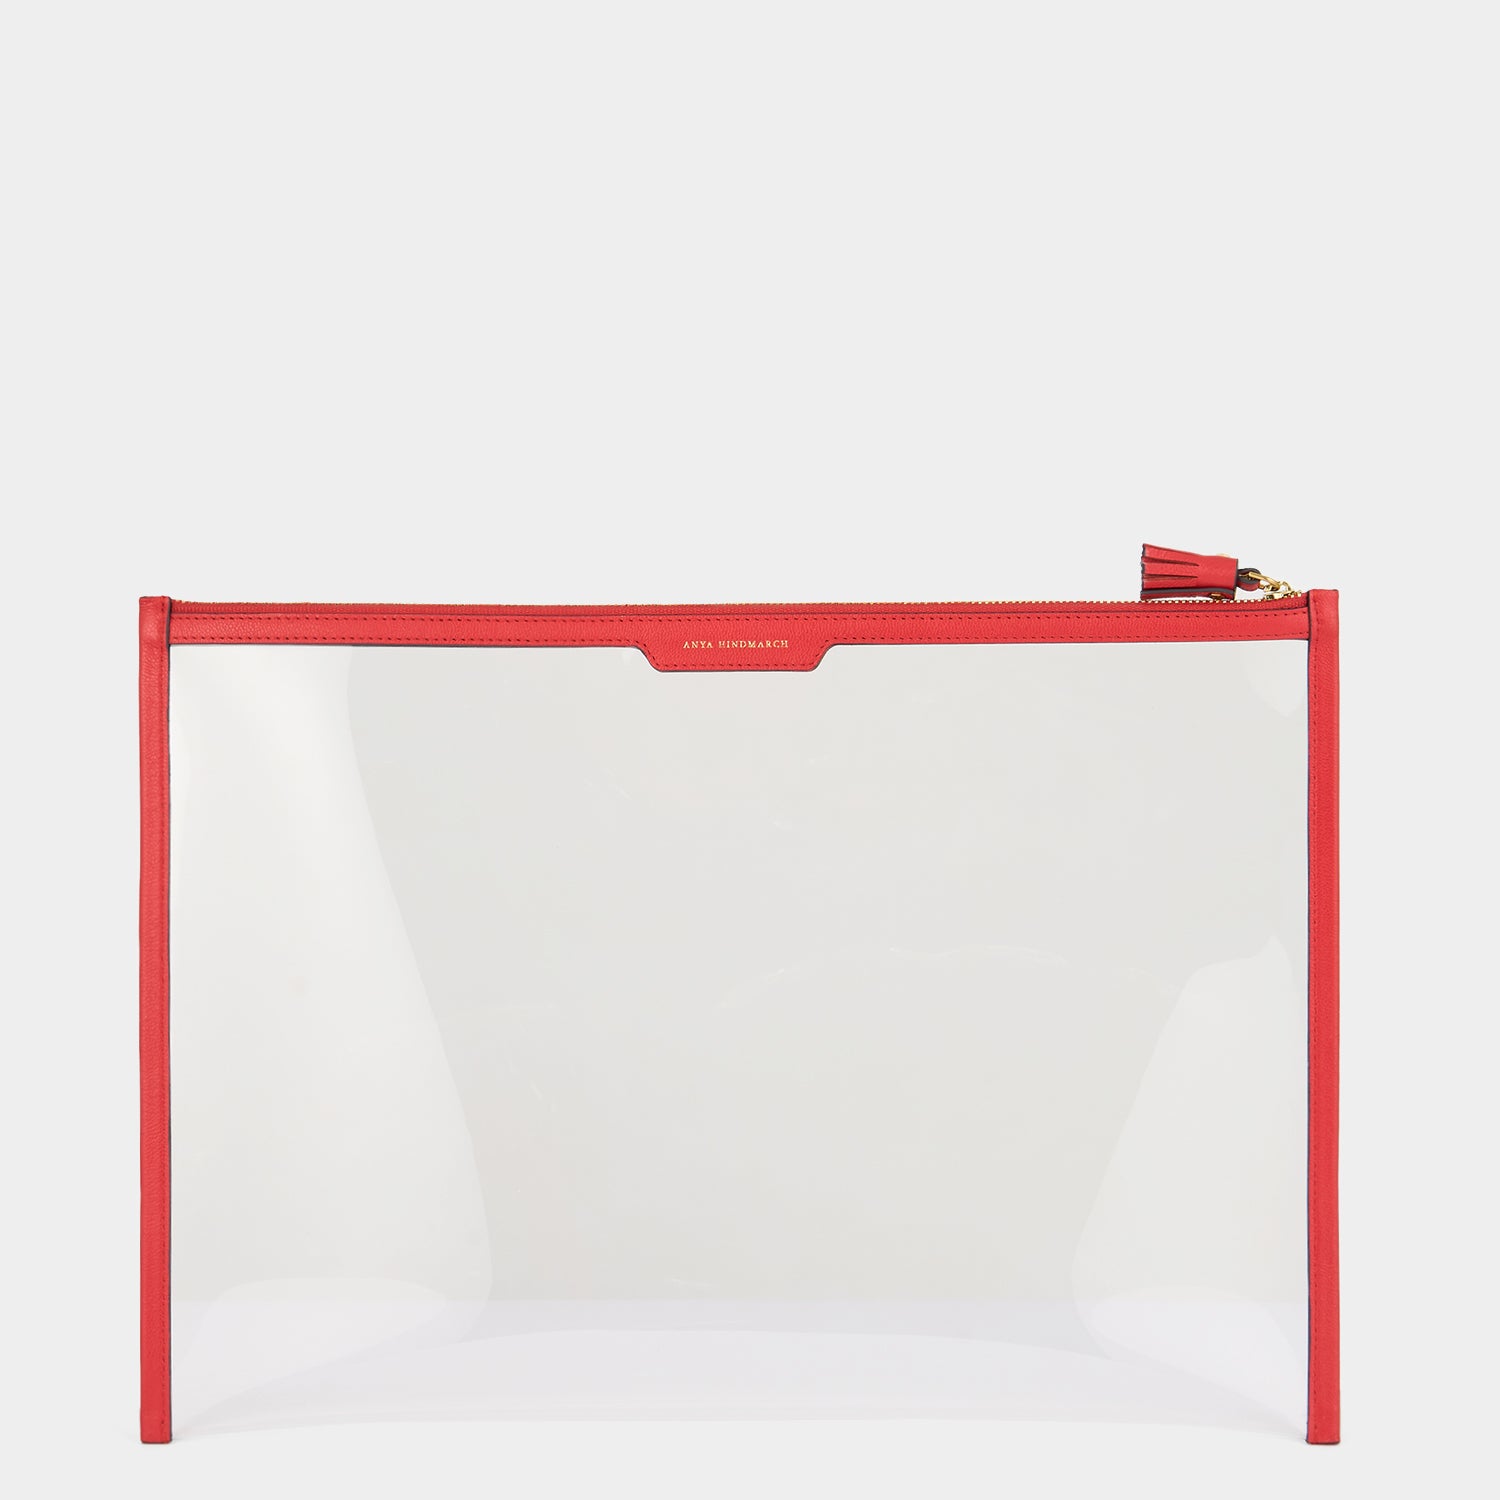 Papers Zip Sleeve -

                  
                    Capra Leather in Salmon/Clear -
                  

                  Anya Hindmarch UK
